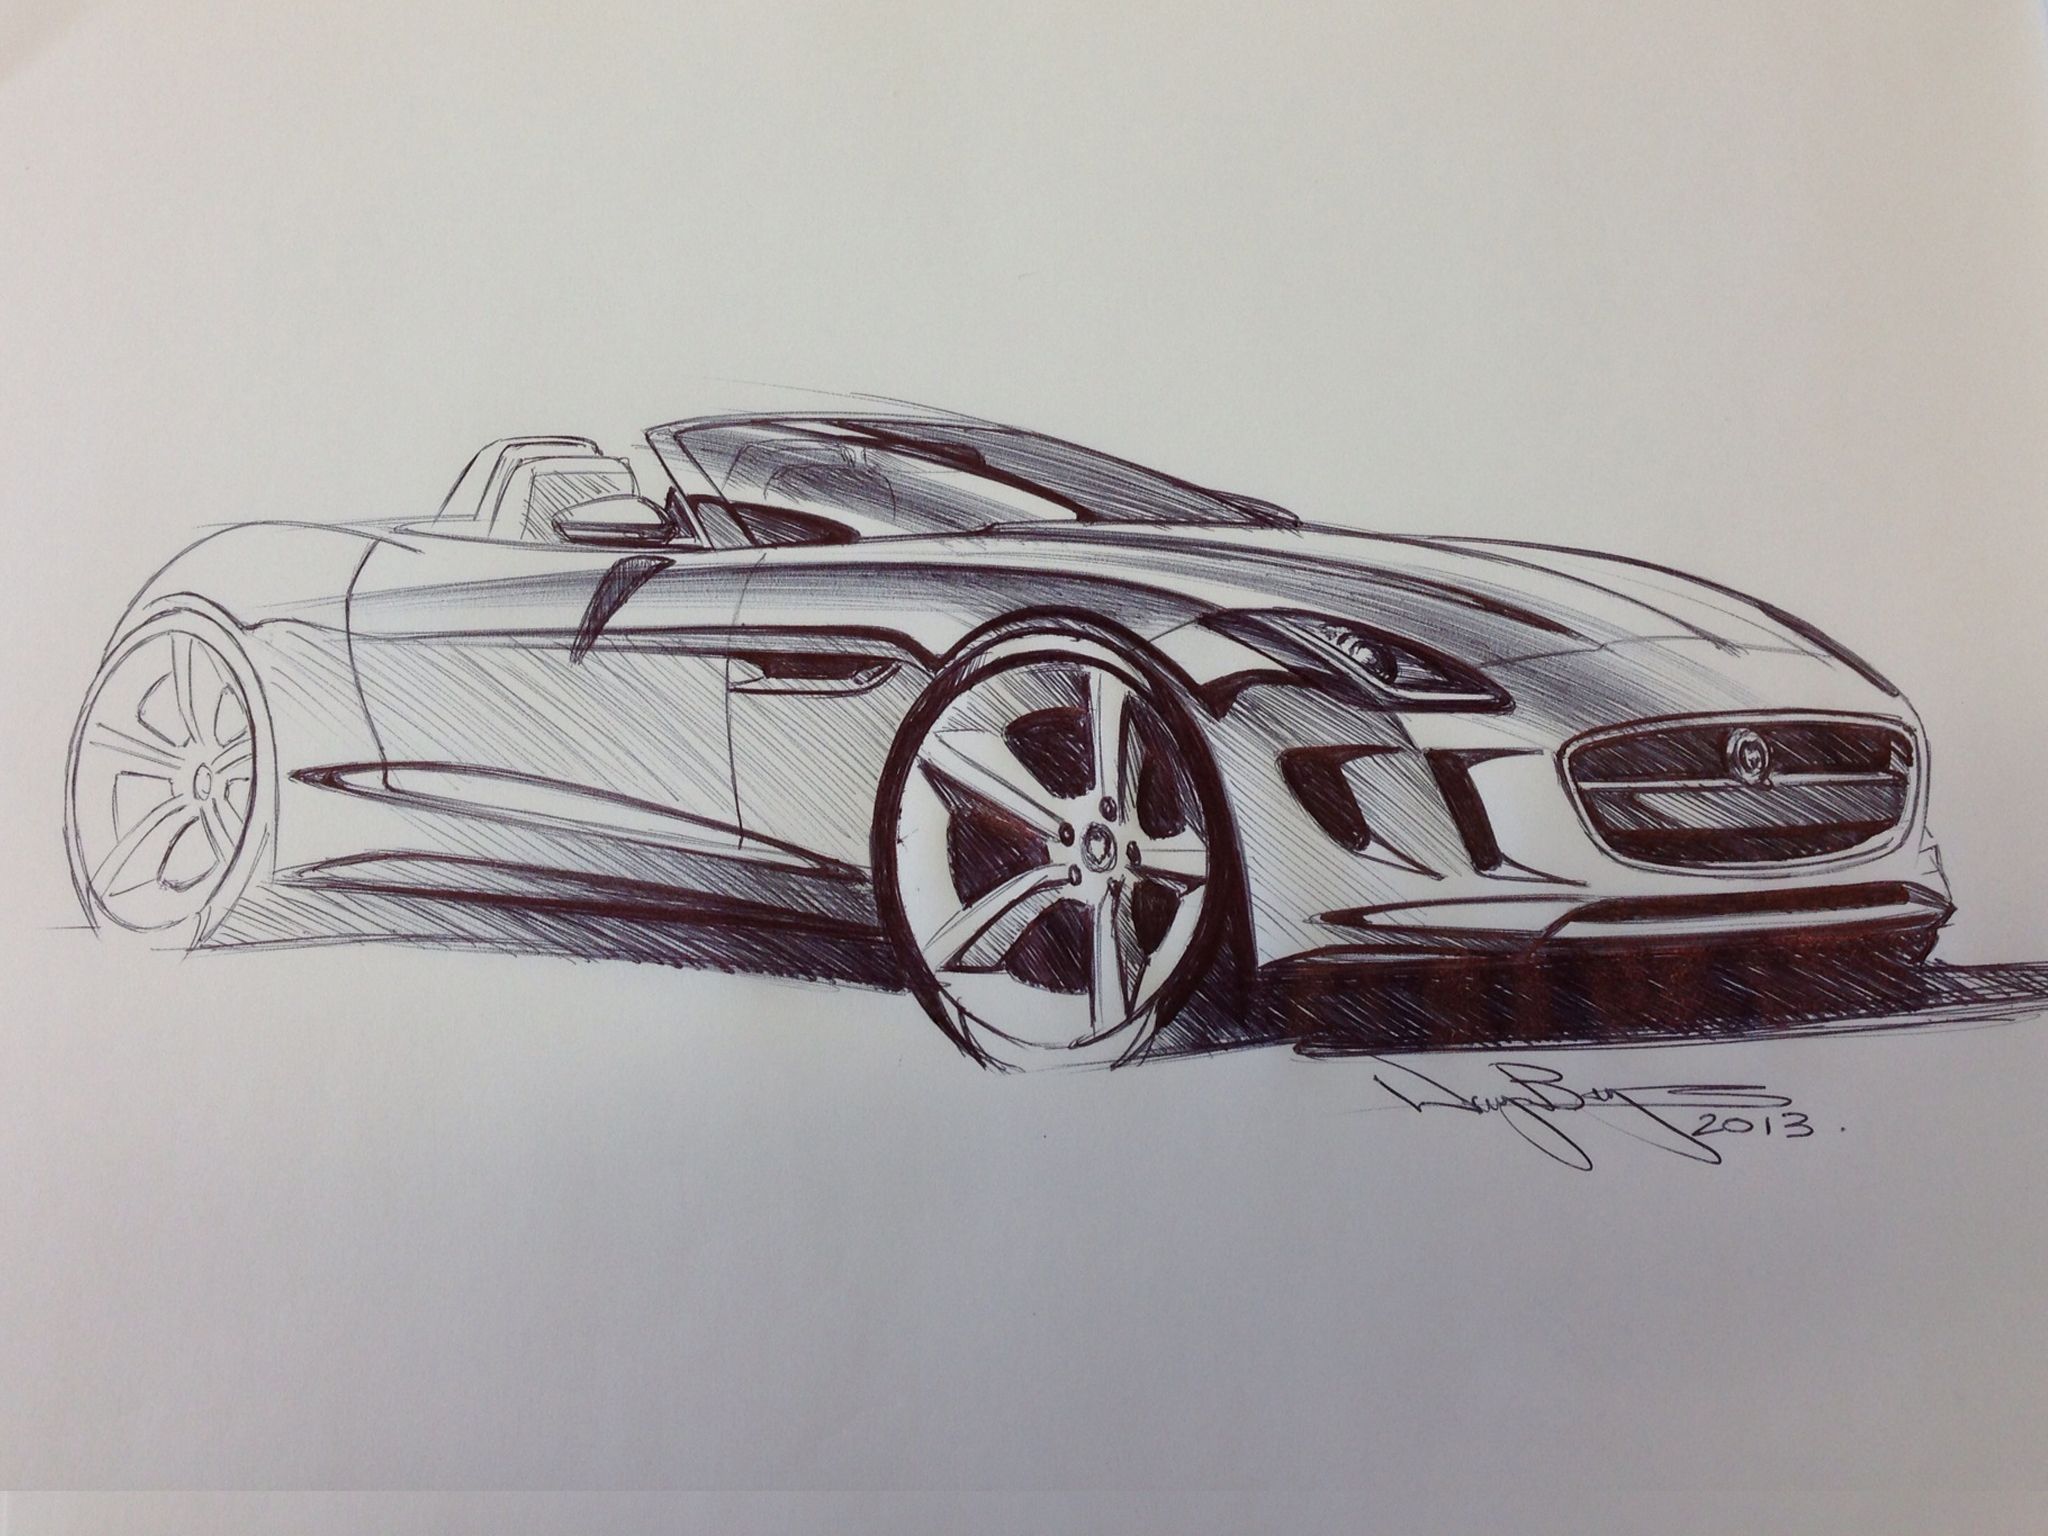 Concept to reality: Designing the Jaguar I-PACE